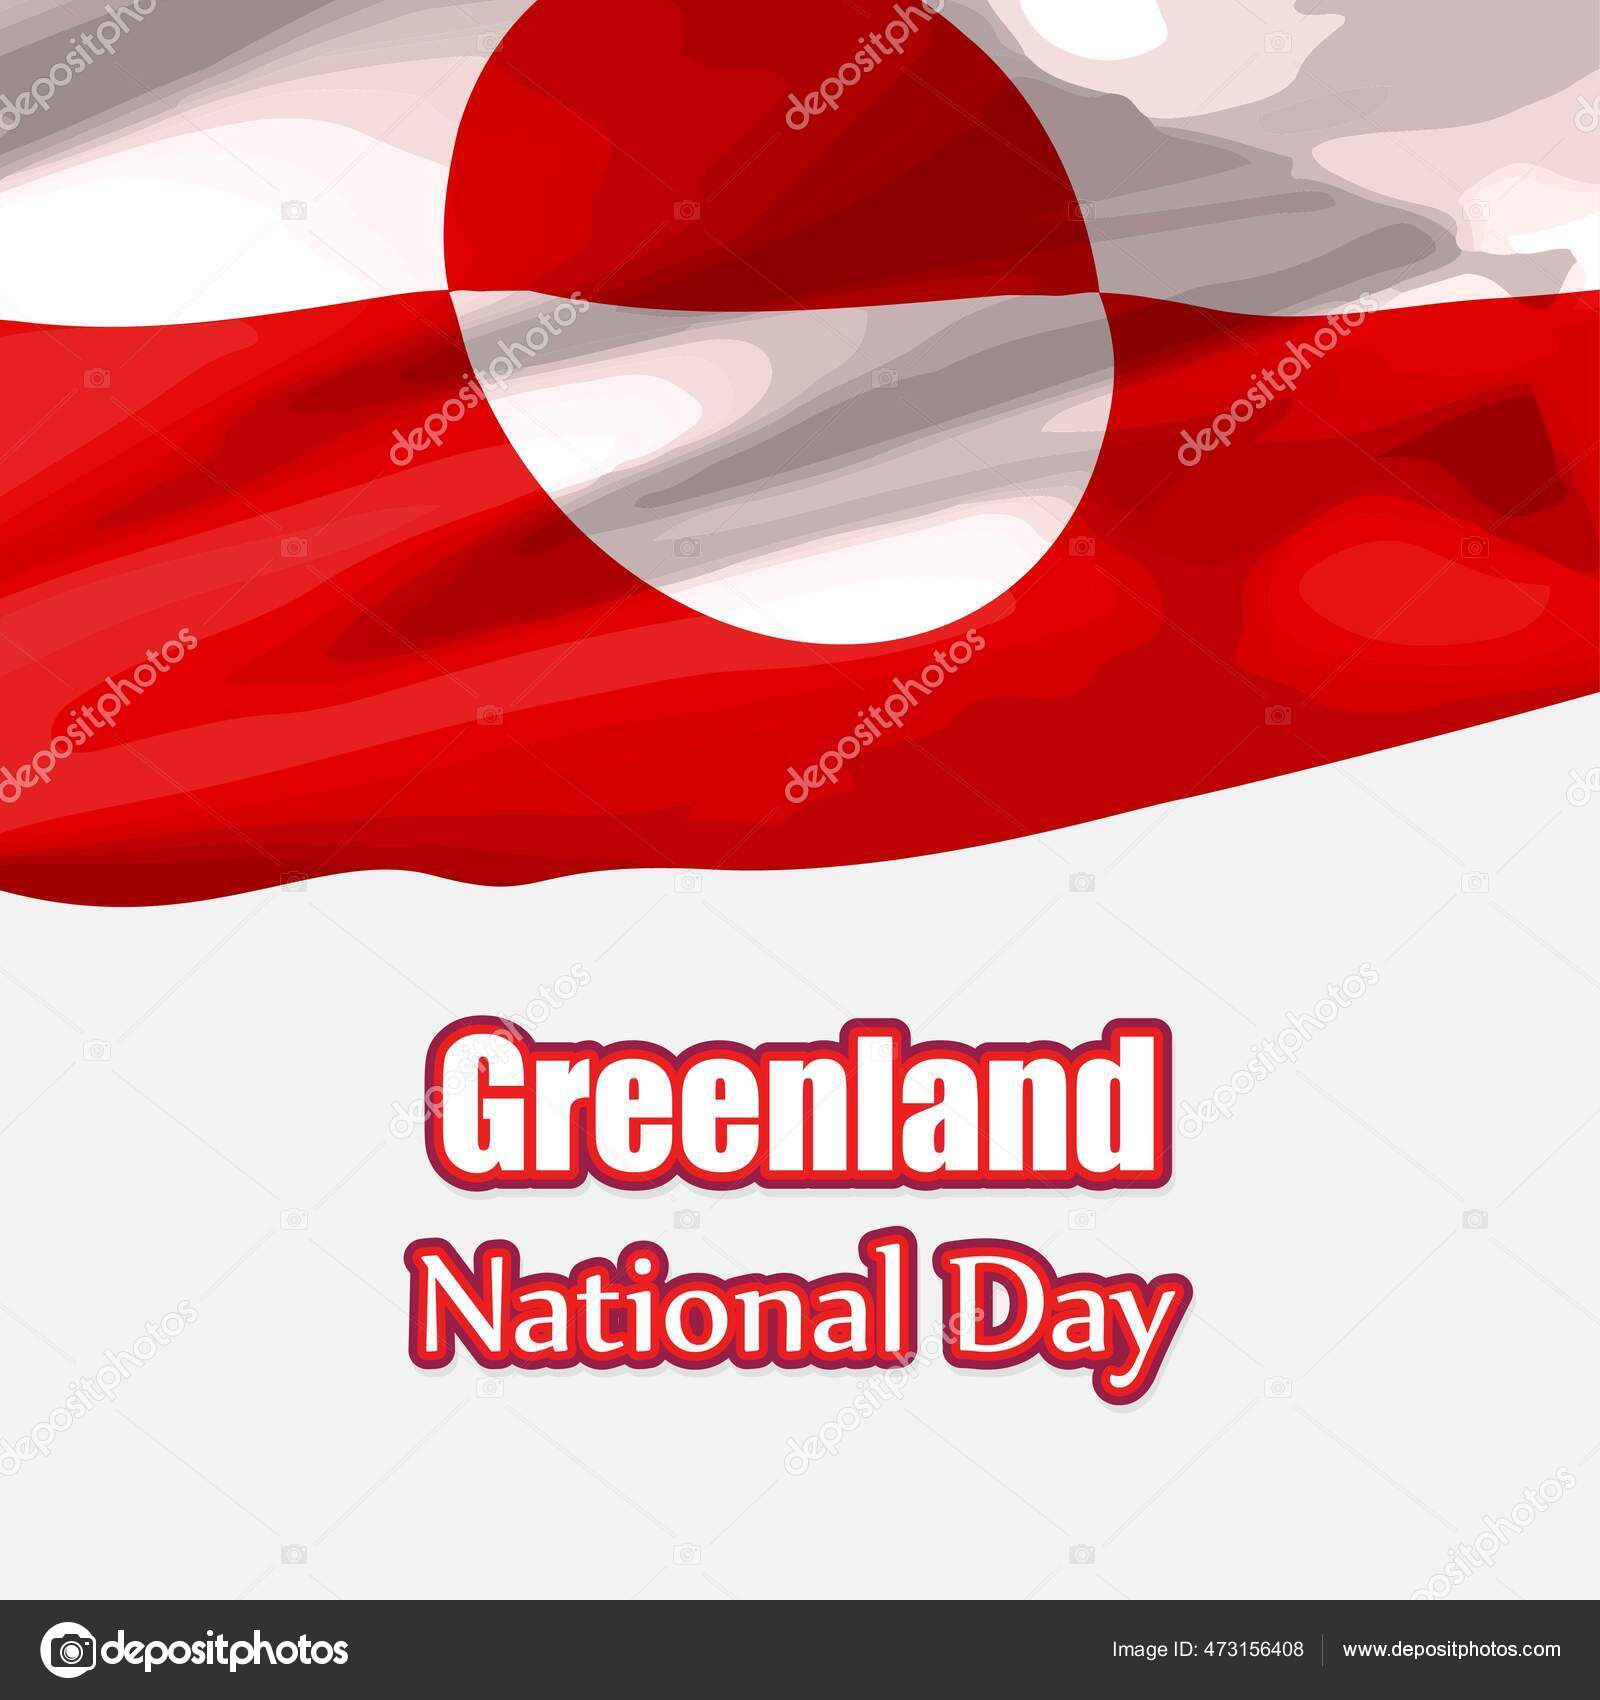 Greenland independence day images vectorielles, Greenland independence day vecteurs libres de droits | Depositphotos